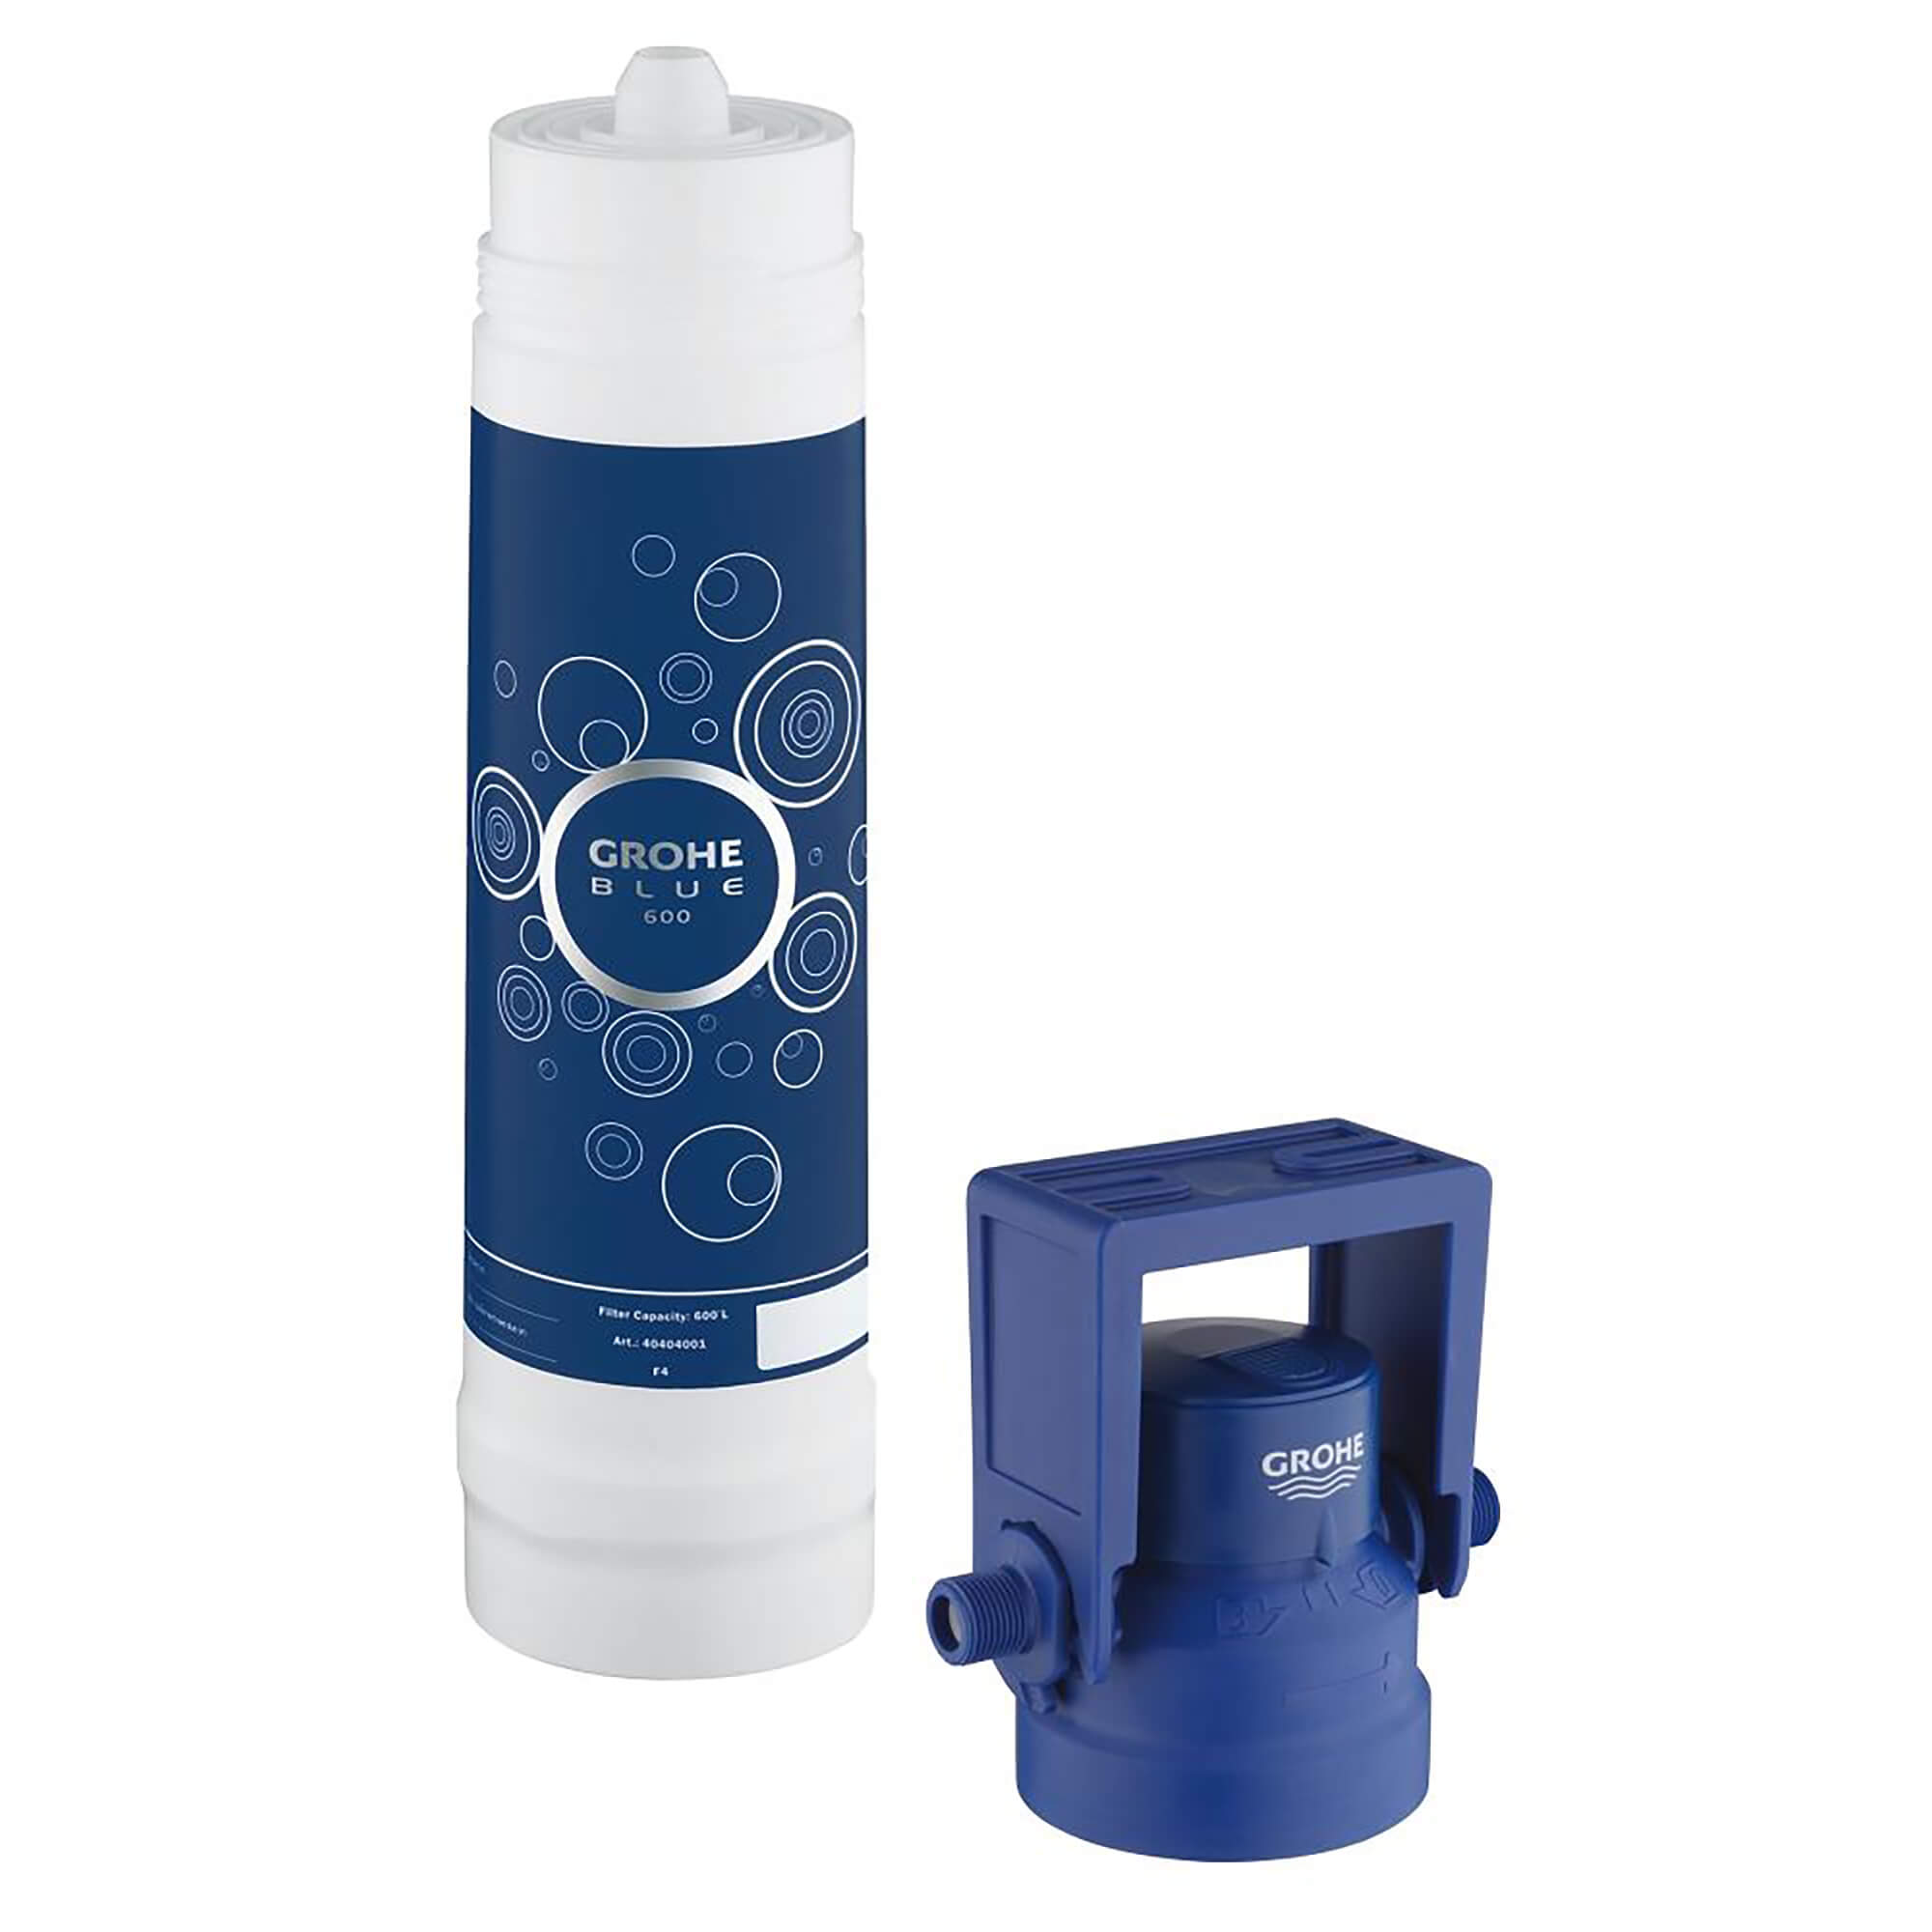 Grohe Blue Water Filter for Home, Capacity: 600 L at best price in Gurgaon